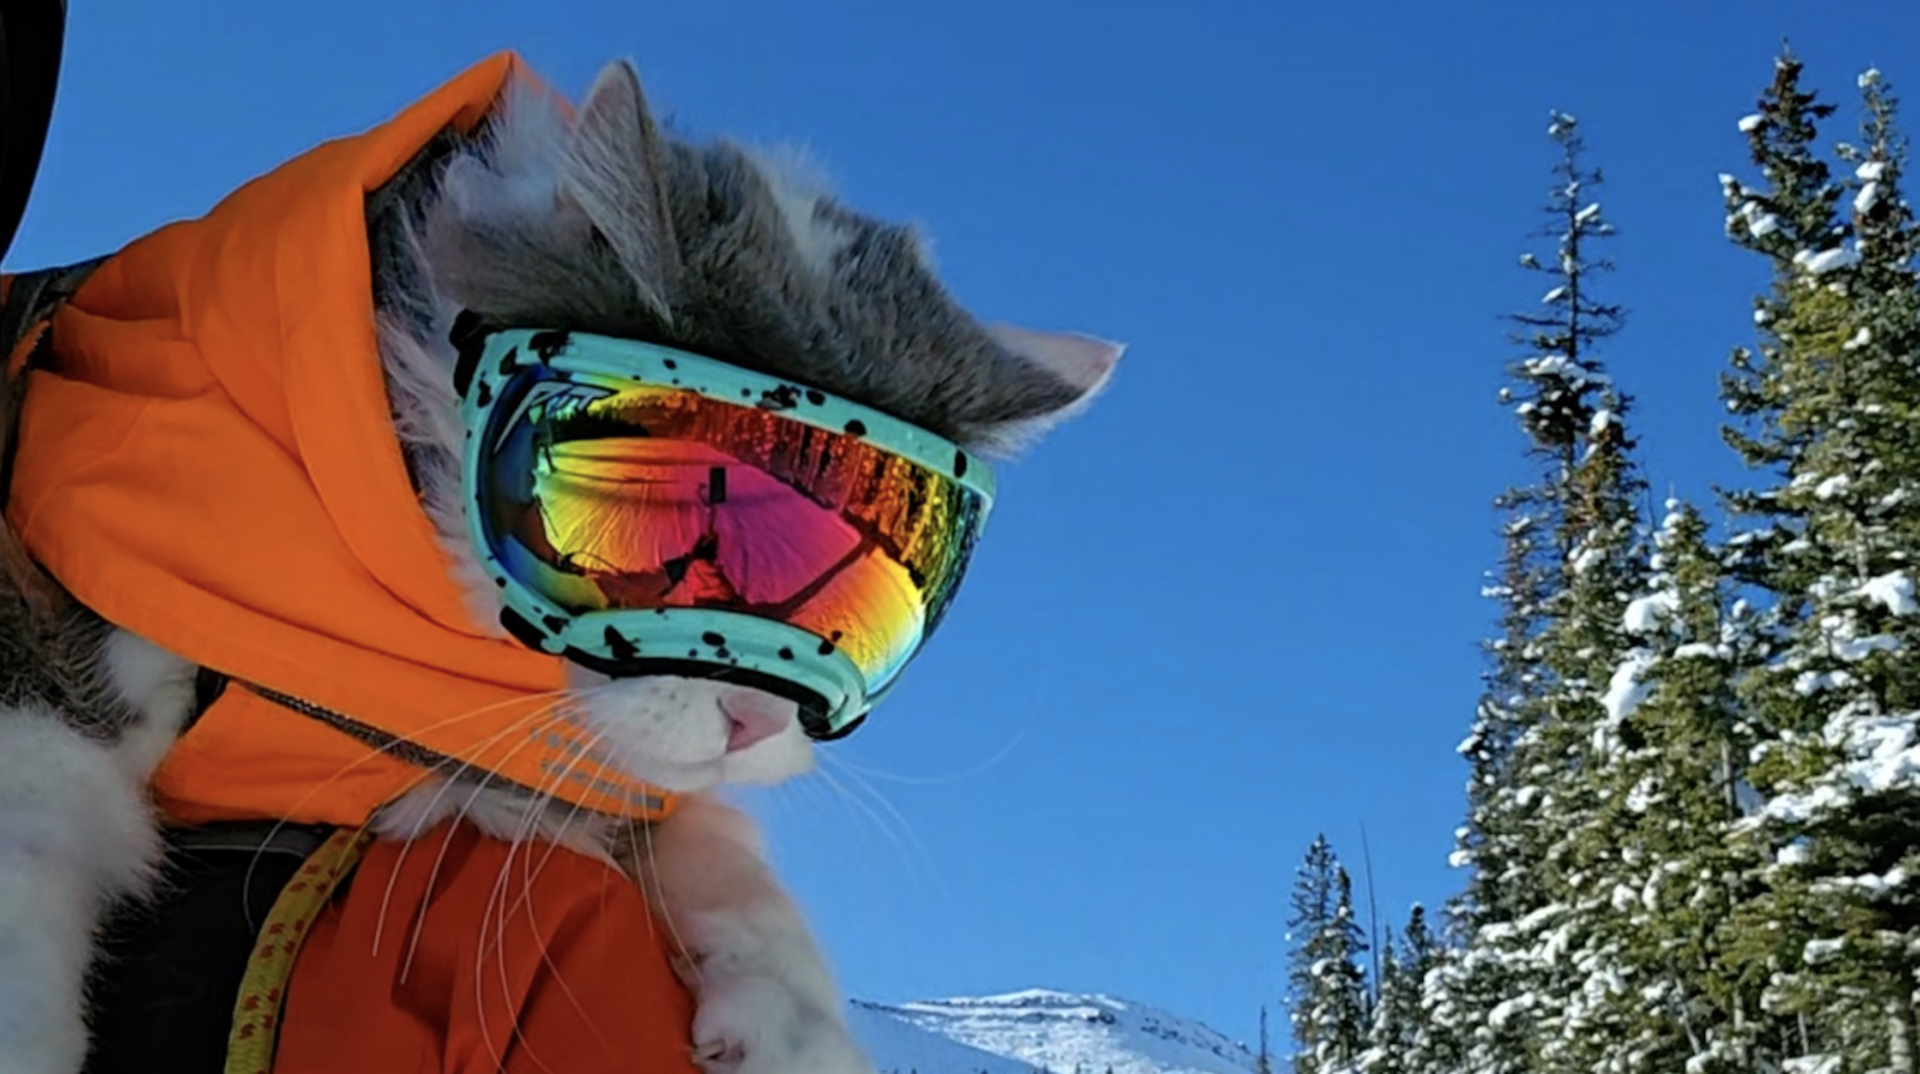 This skiing wonder cat is promoting safer use of the great outdoors